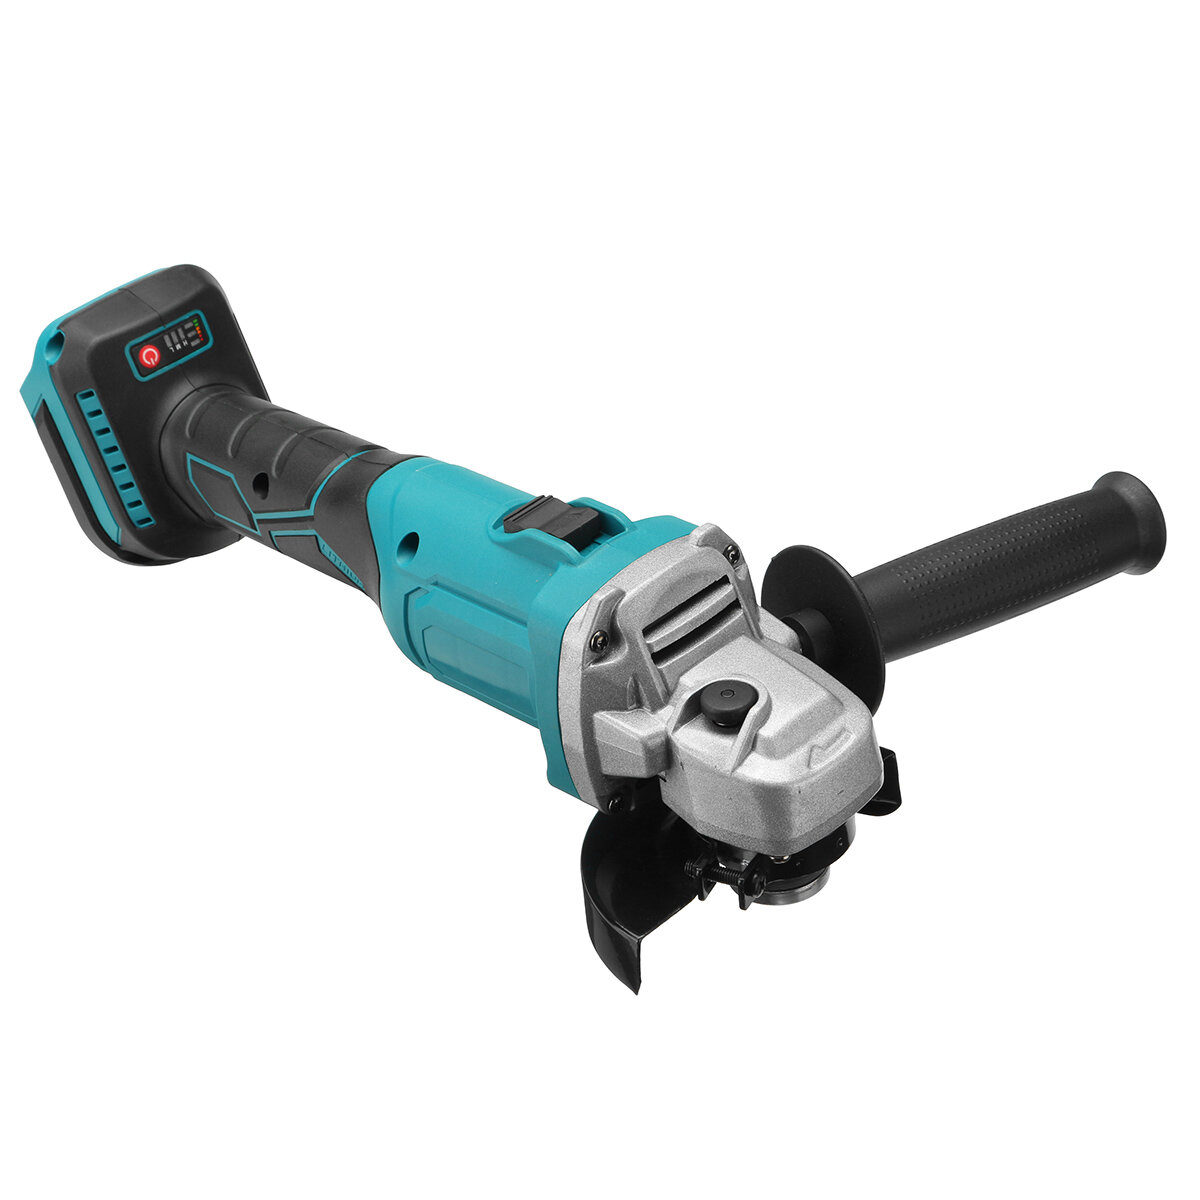 best price,125mm,cordless,brushless,angle,grinder,for,makita,18v,eu,coupon,price,discount